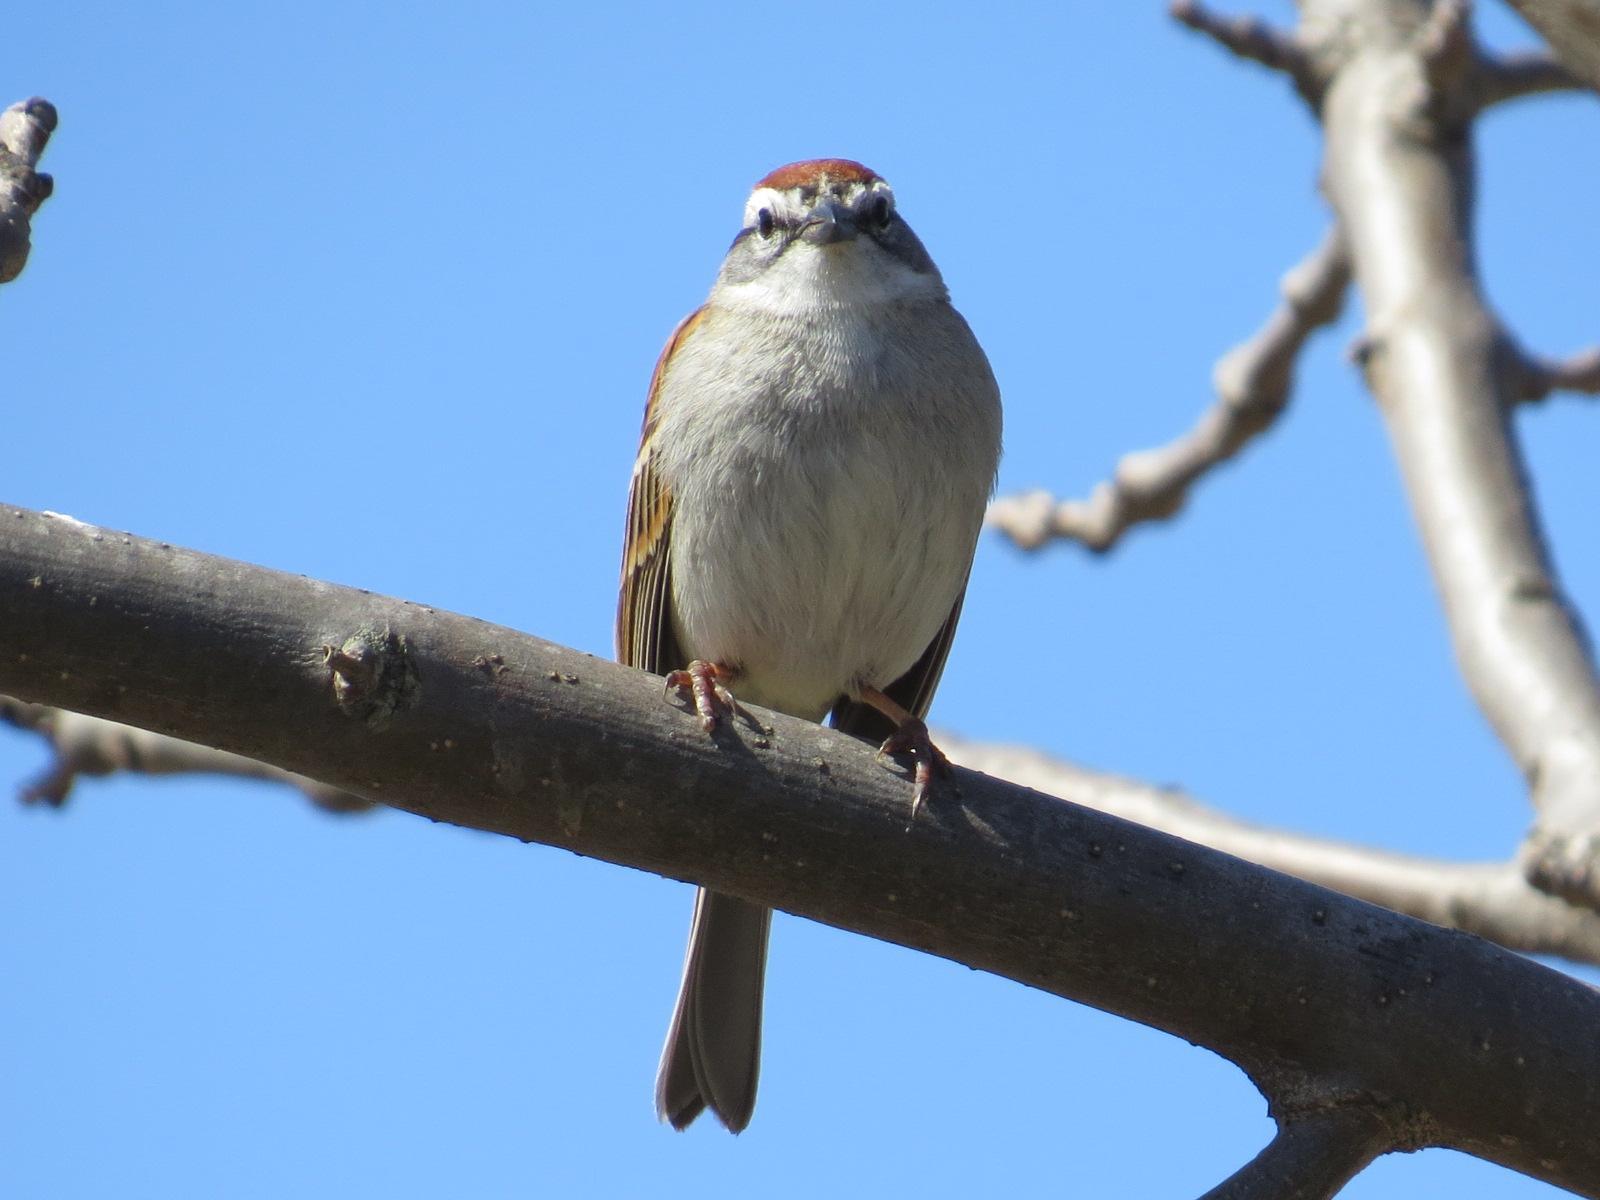 Chipping Sparrow Photo by Kathy Wooding